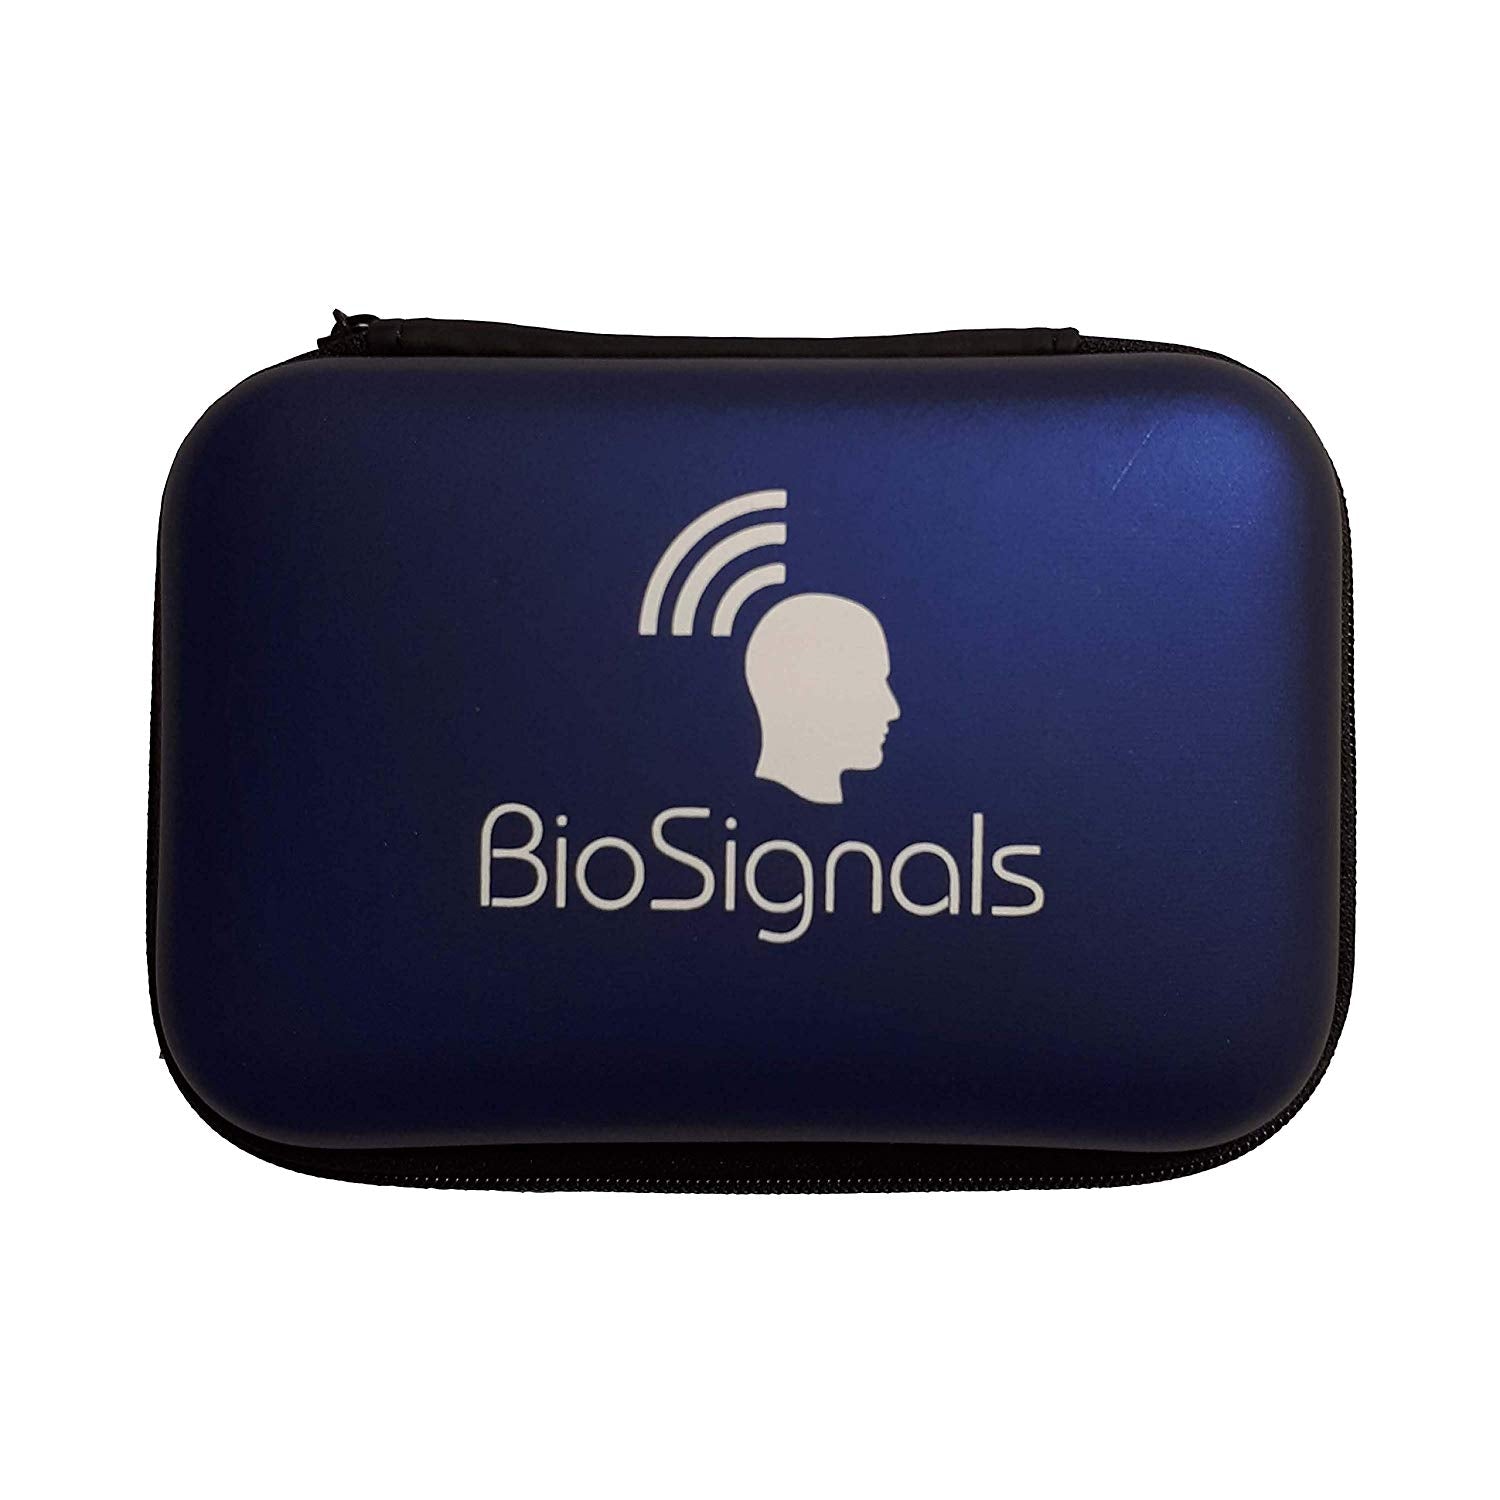 Biofeedback 5 sensors Bluetooth device. Professional machine for clinical or home use